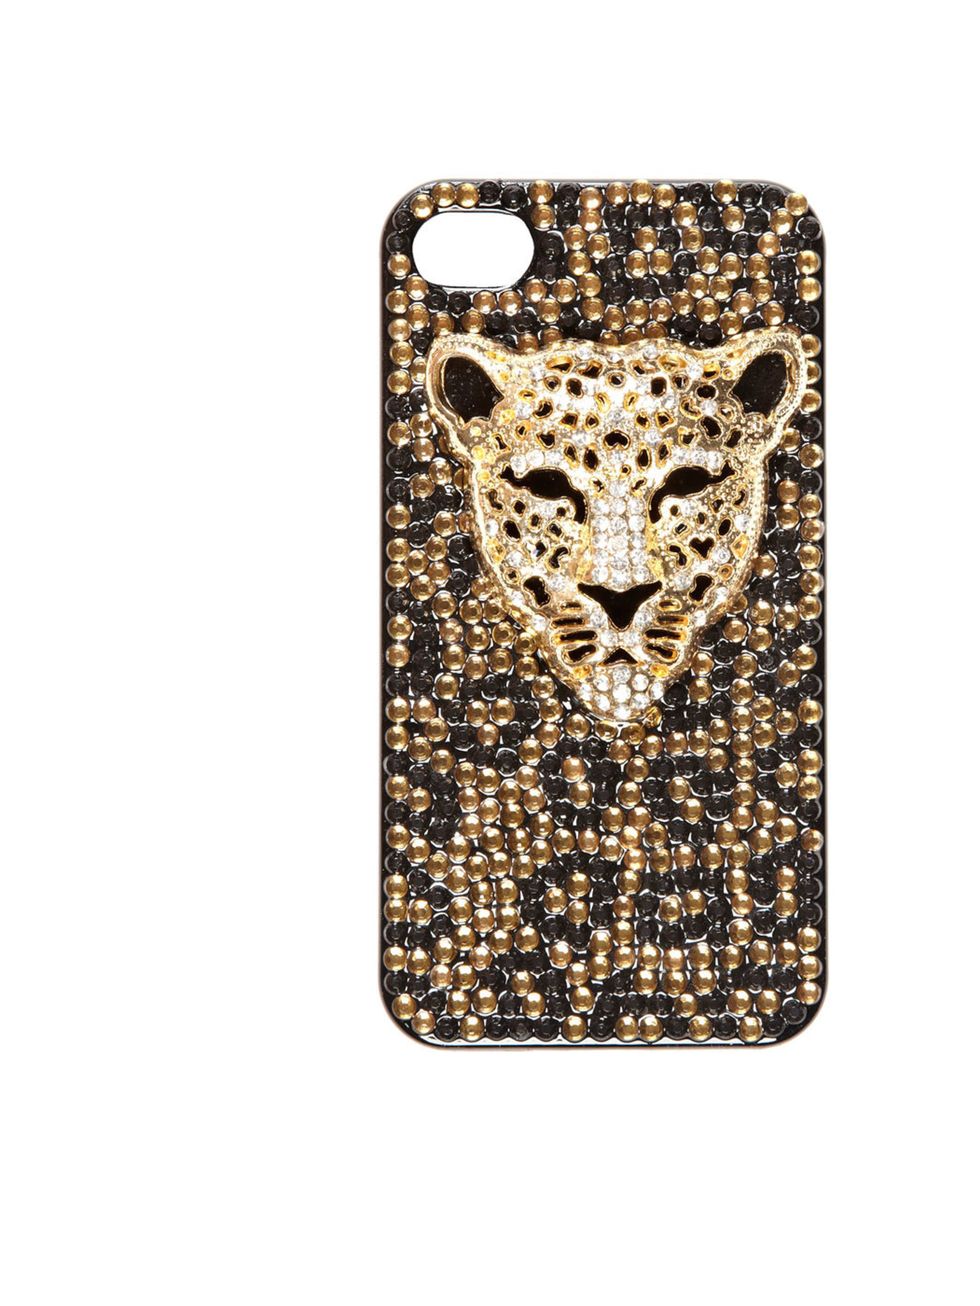 <p><a href="http://www.riverisland.com/women/gifts--cosmetics/technology/Tiger-diamante-iPhone-cover-626388">River Island</a> embellished iPhone cover, £15</p>